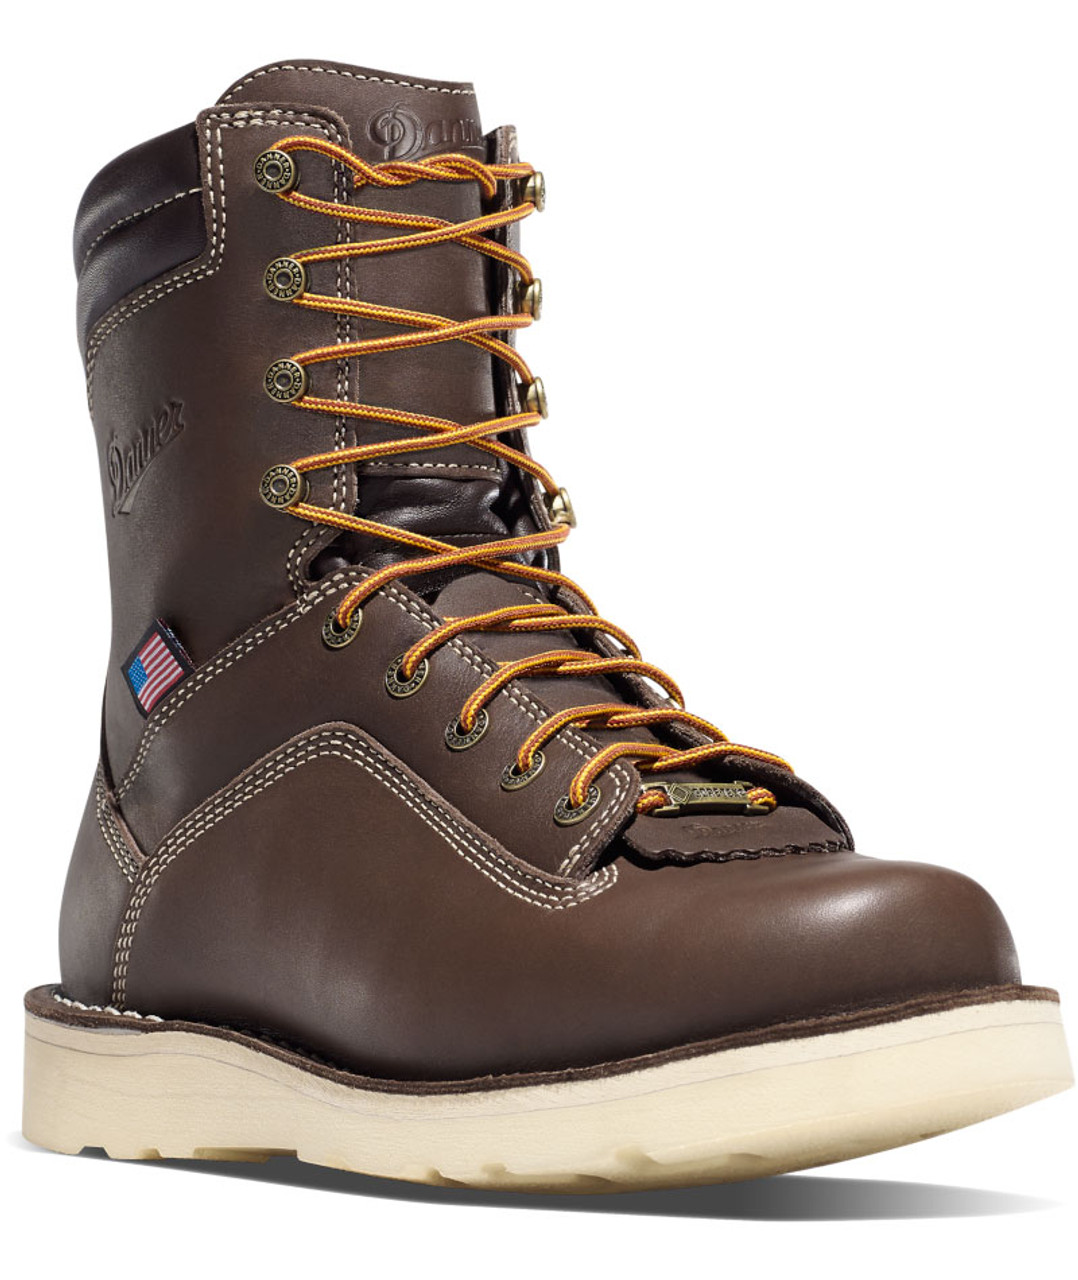 Danner 17329 USA QUARRY GORE-TEX Alloy Toe 400g Insulated Work 